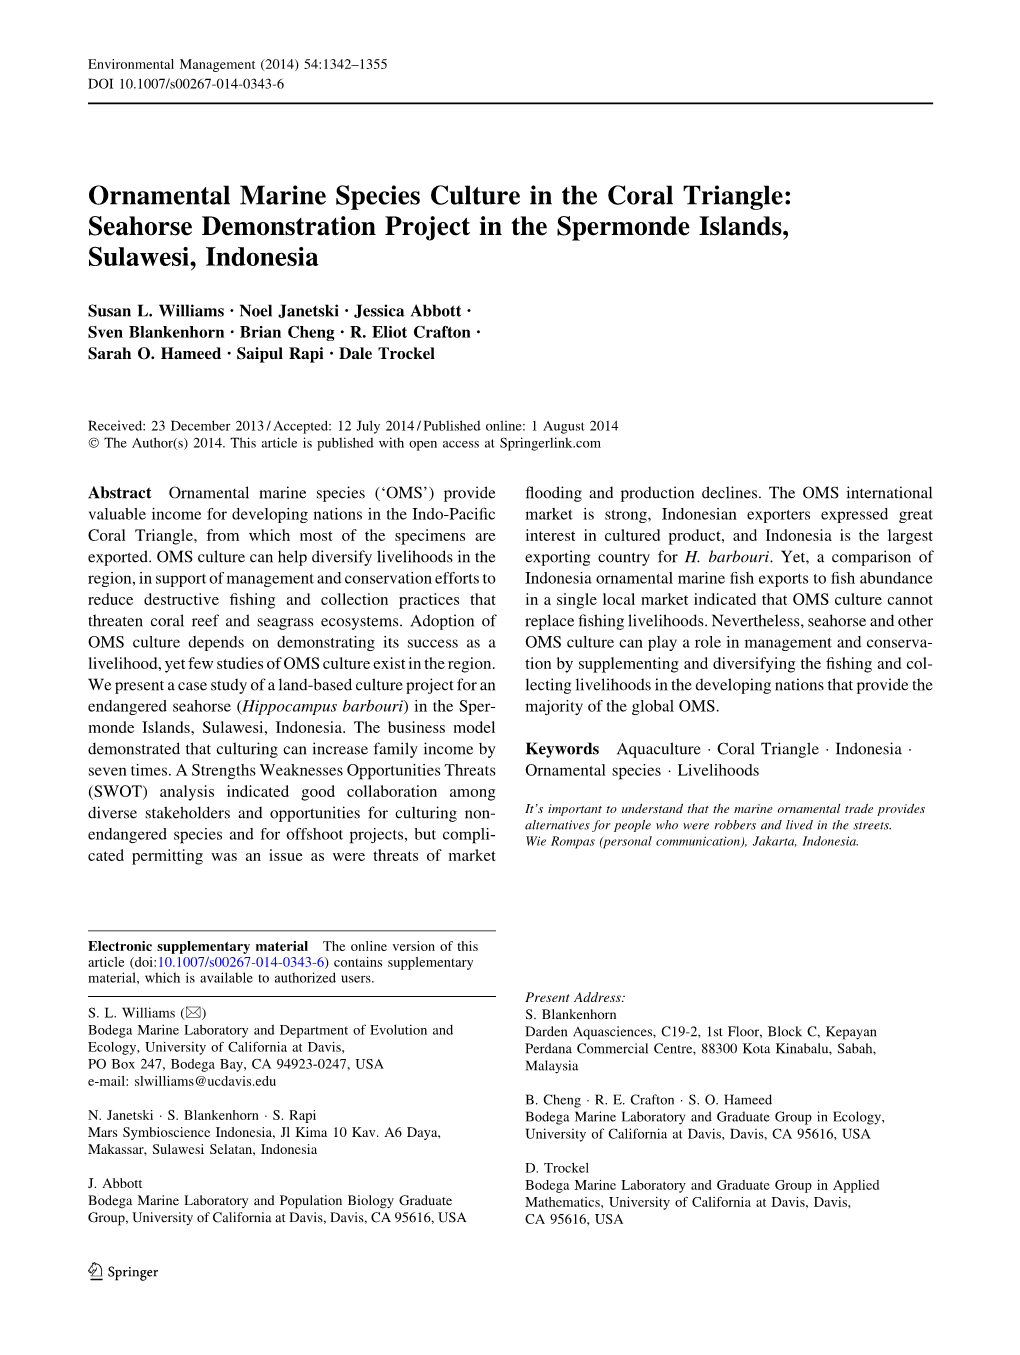 Ornamental Marine Species Culture in the Coral Triangle: Seahorse Demonstration Project in the Spermonde Islands, Sulawesi, Indonesia